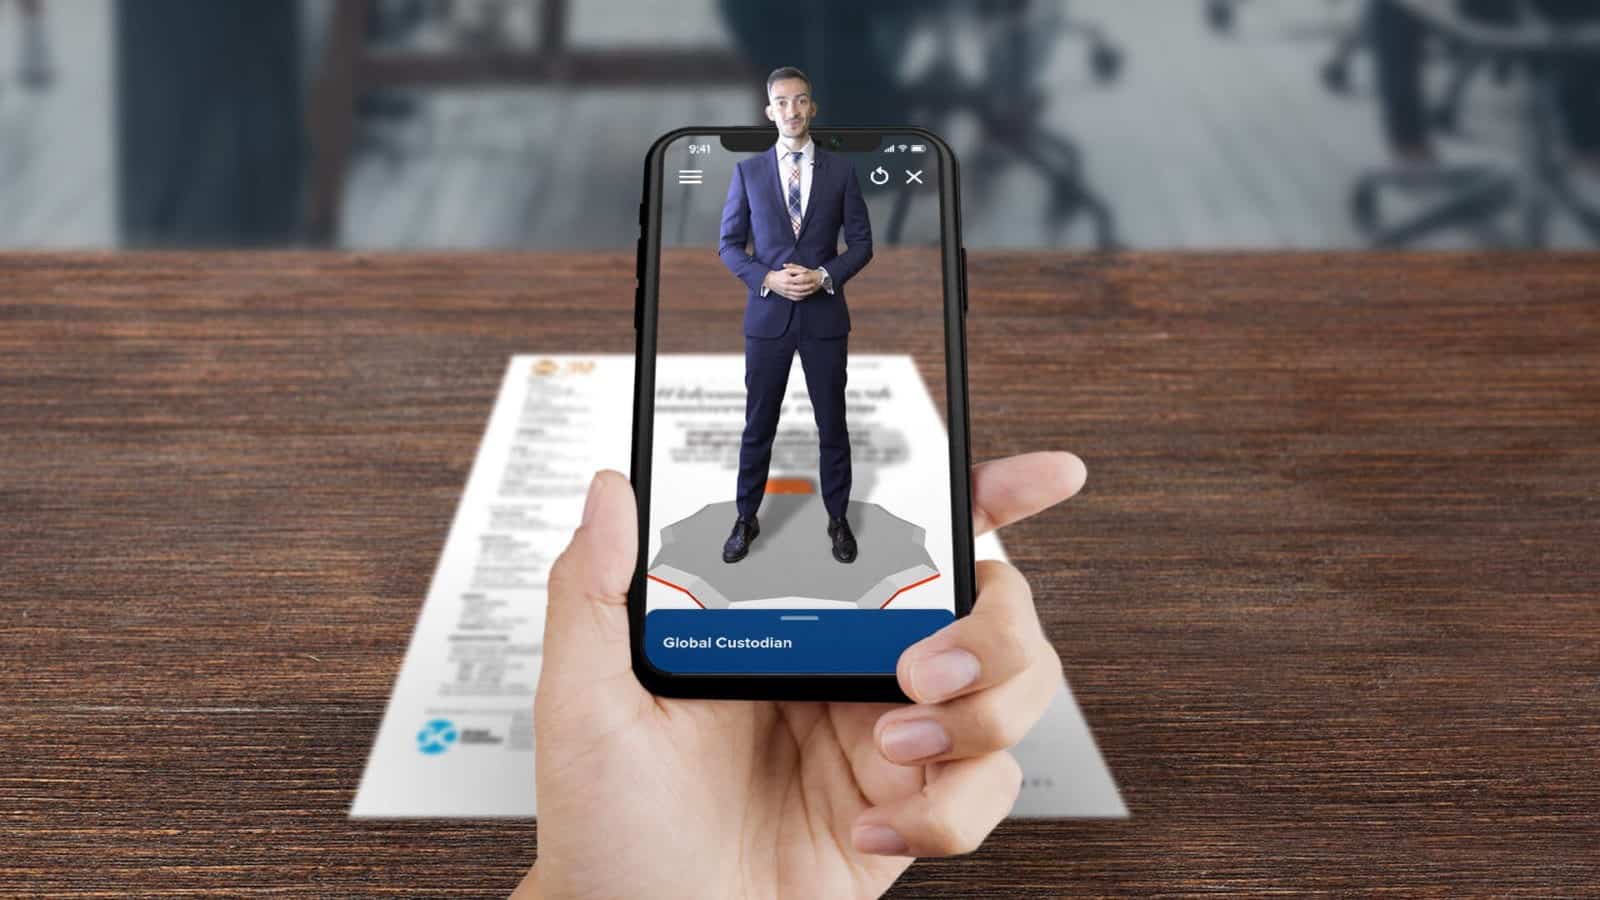 A smartphone scanning a document which present and AR person wearing a suit.